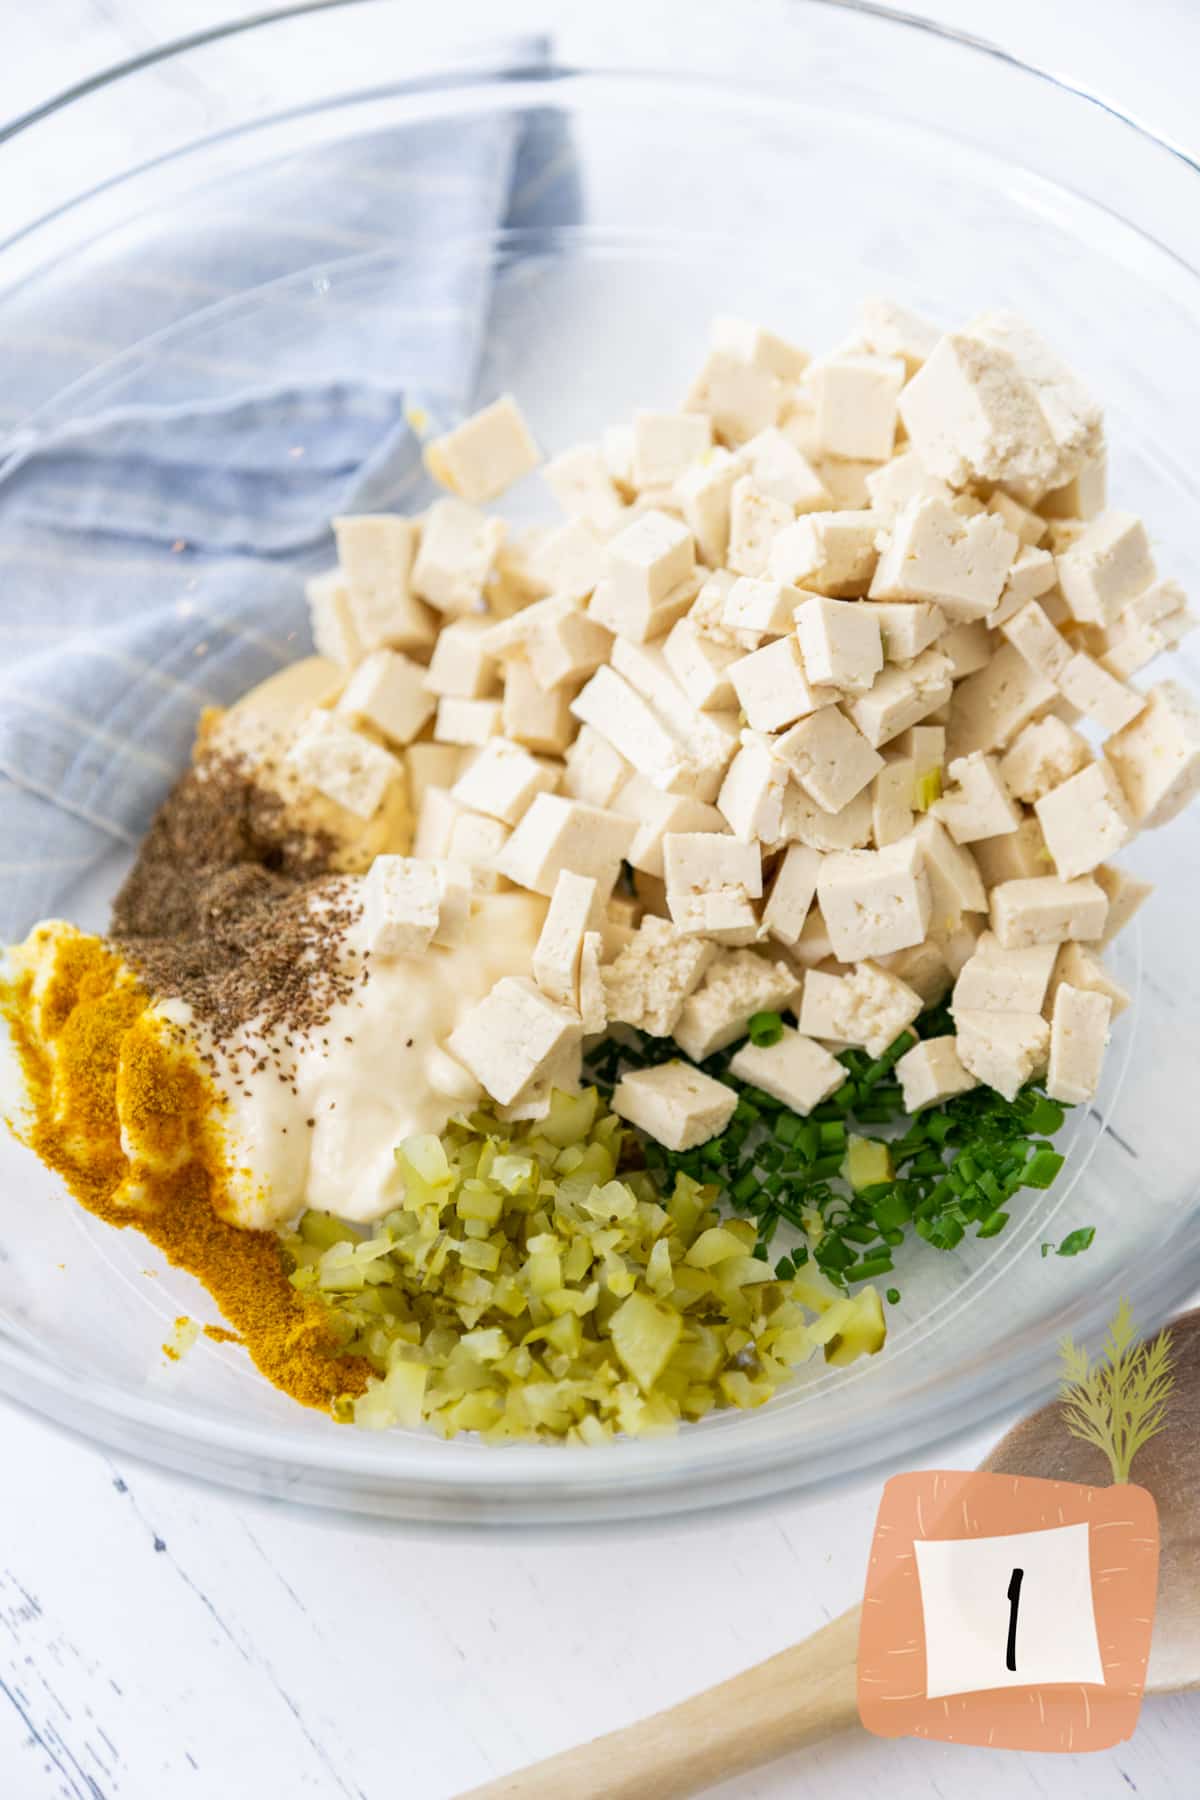 Cubed tofu and spices in a glass mixing bowl.